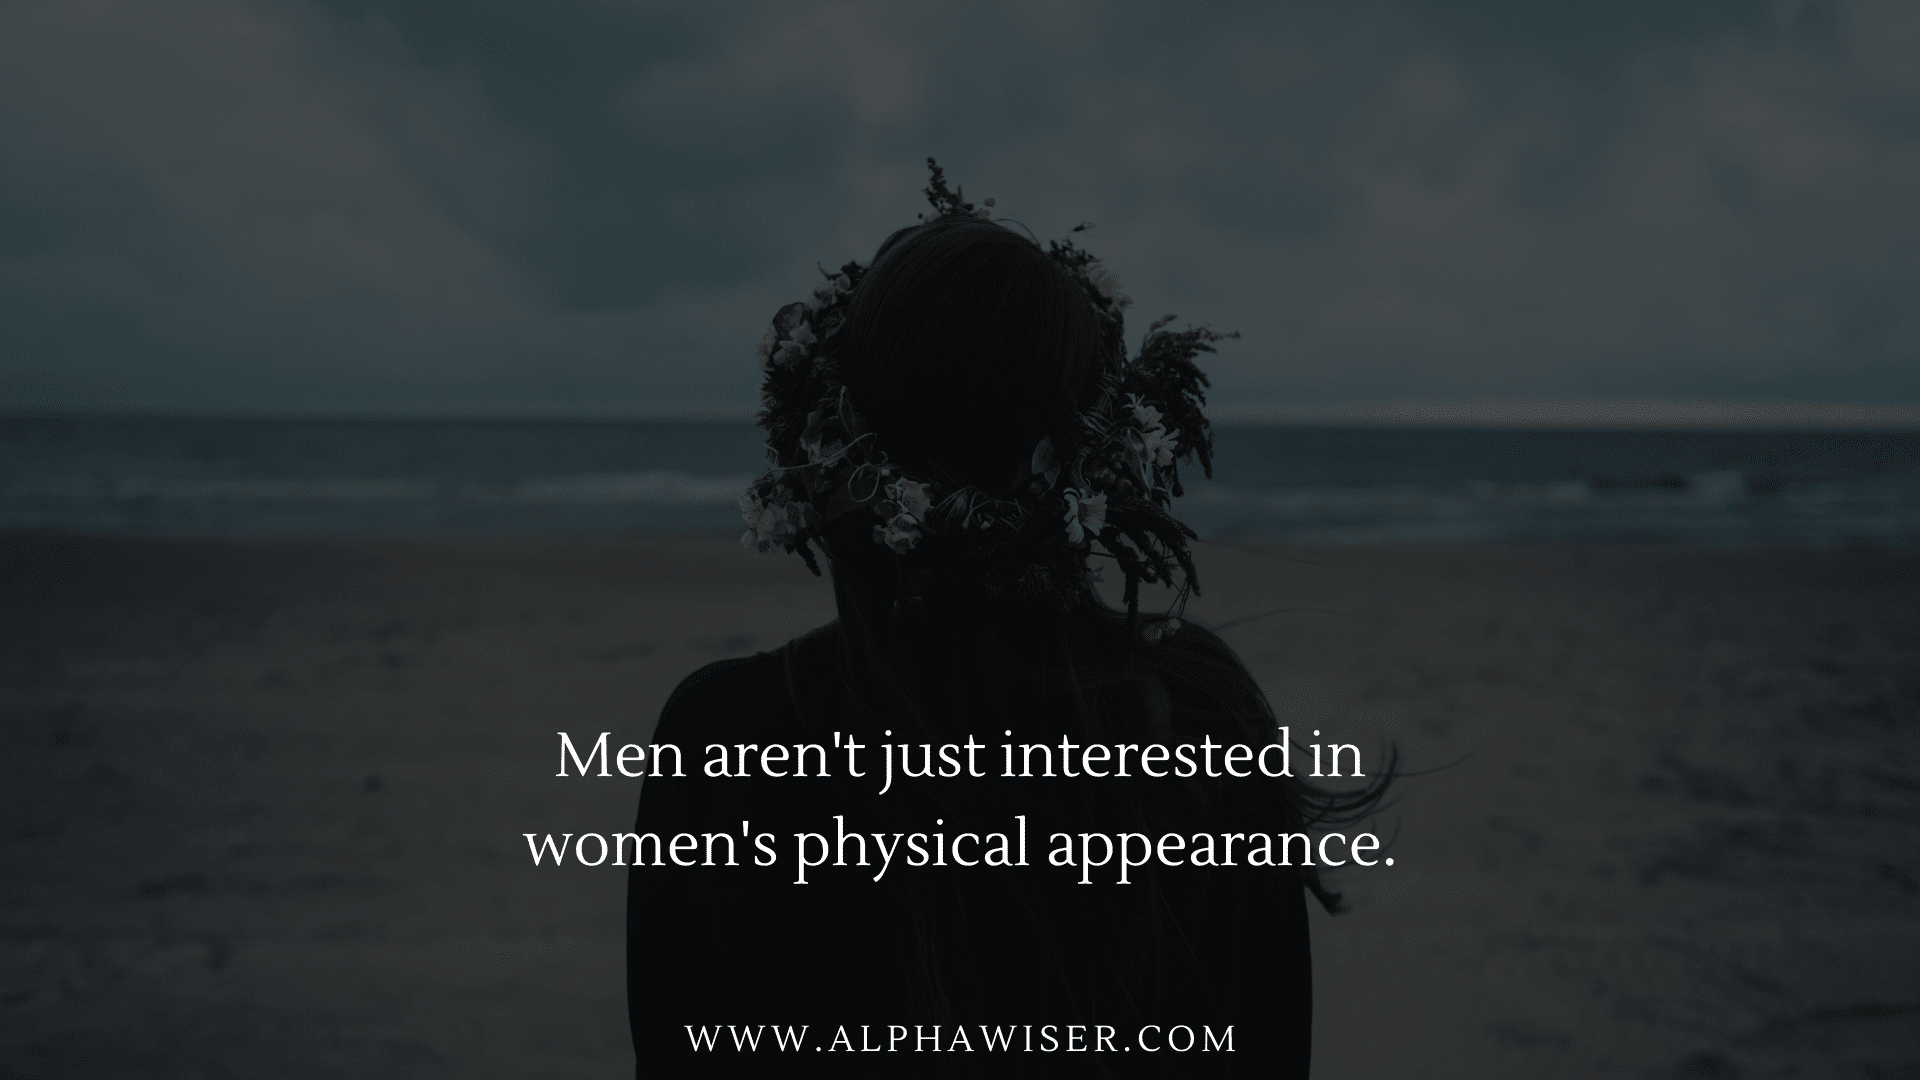 Men aren’t just interested in women’s physical appearance